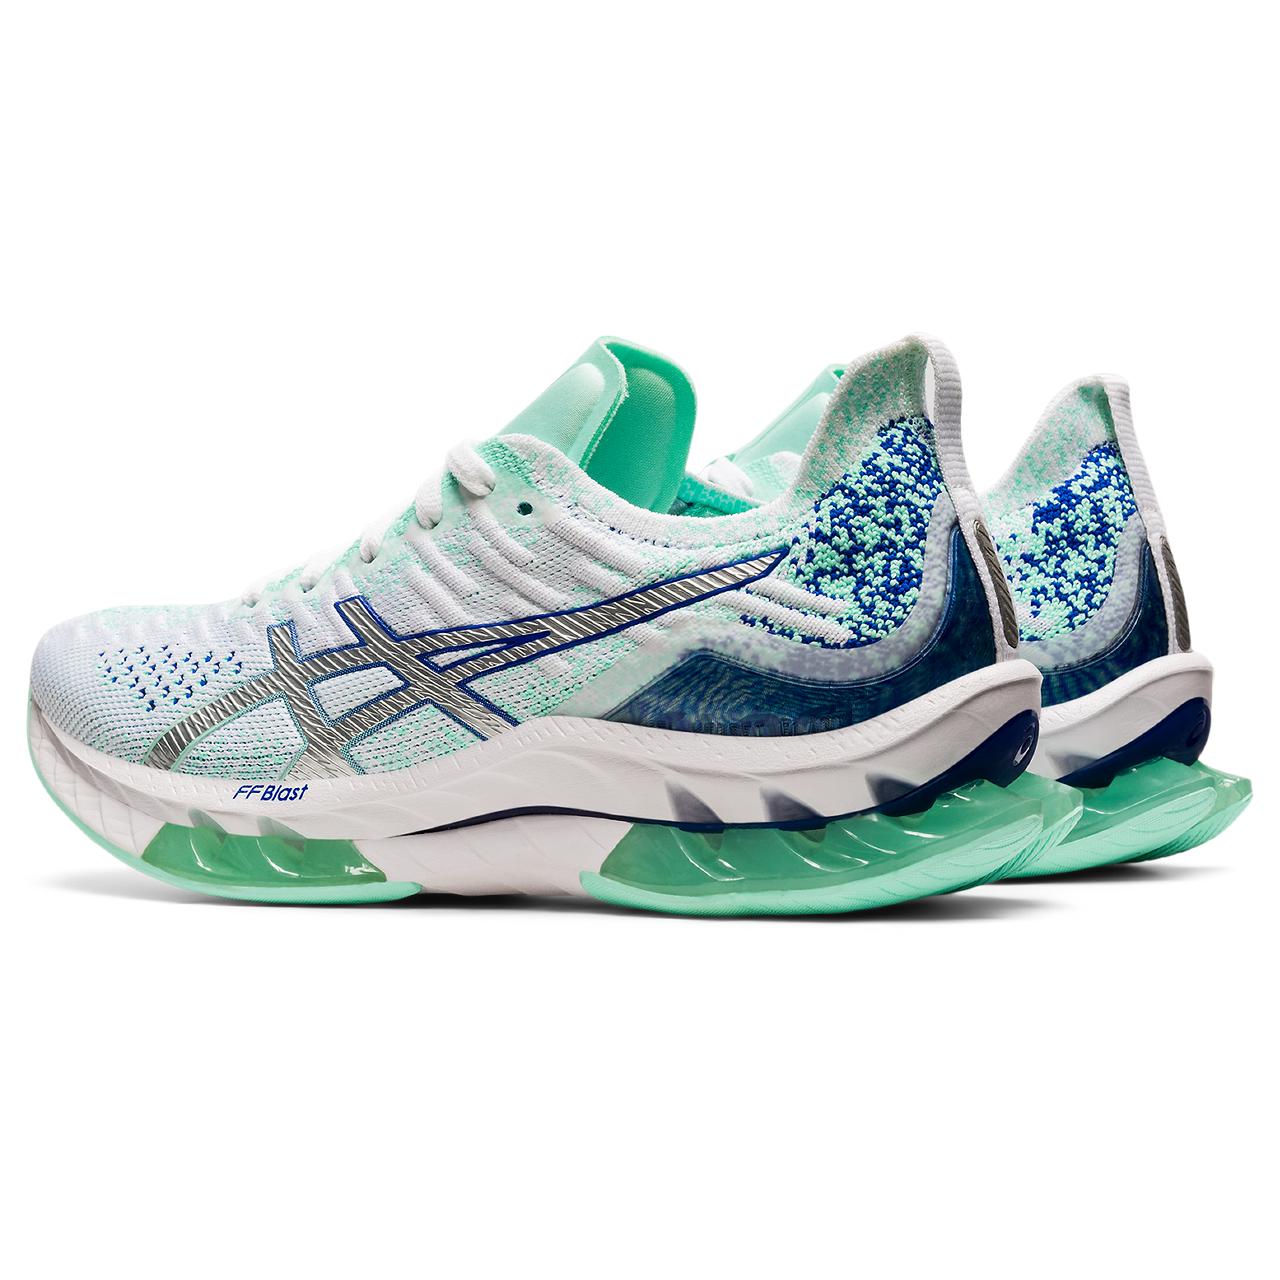 The Women's Kinsei Blast is designed for runners seeking a cushioned and smooth shoe.  The Gel in the heel and forefoot creates lots of cushioning during the landing phase- the shoe then propels you forward into that smooth transition.  ASICS also added a Pebax plate to the midsole that makes for fast transitions and lots of forward momentum.